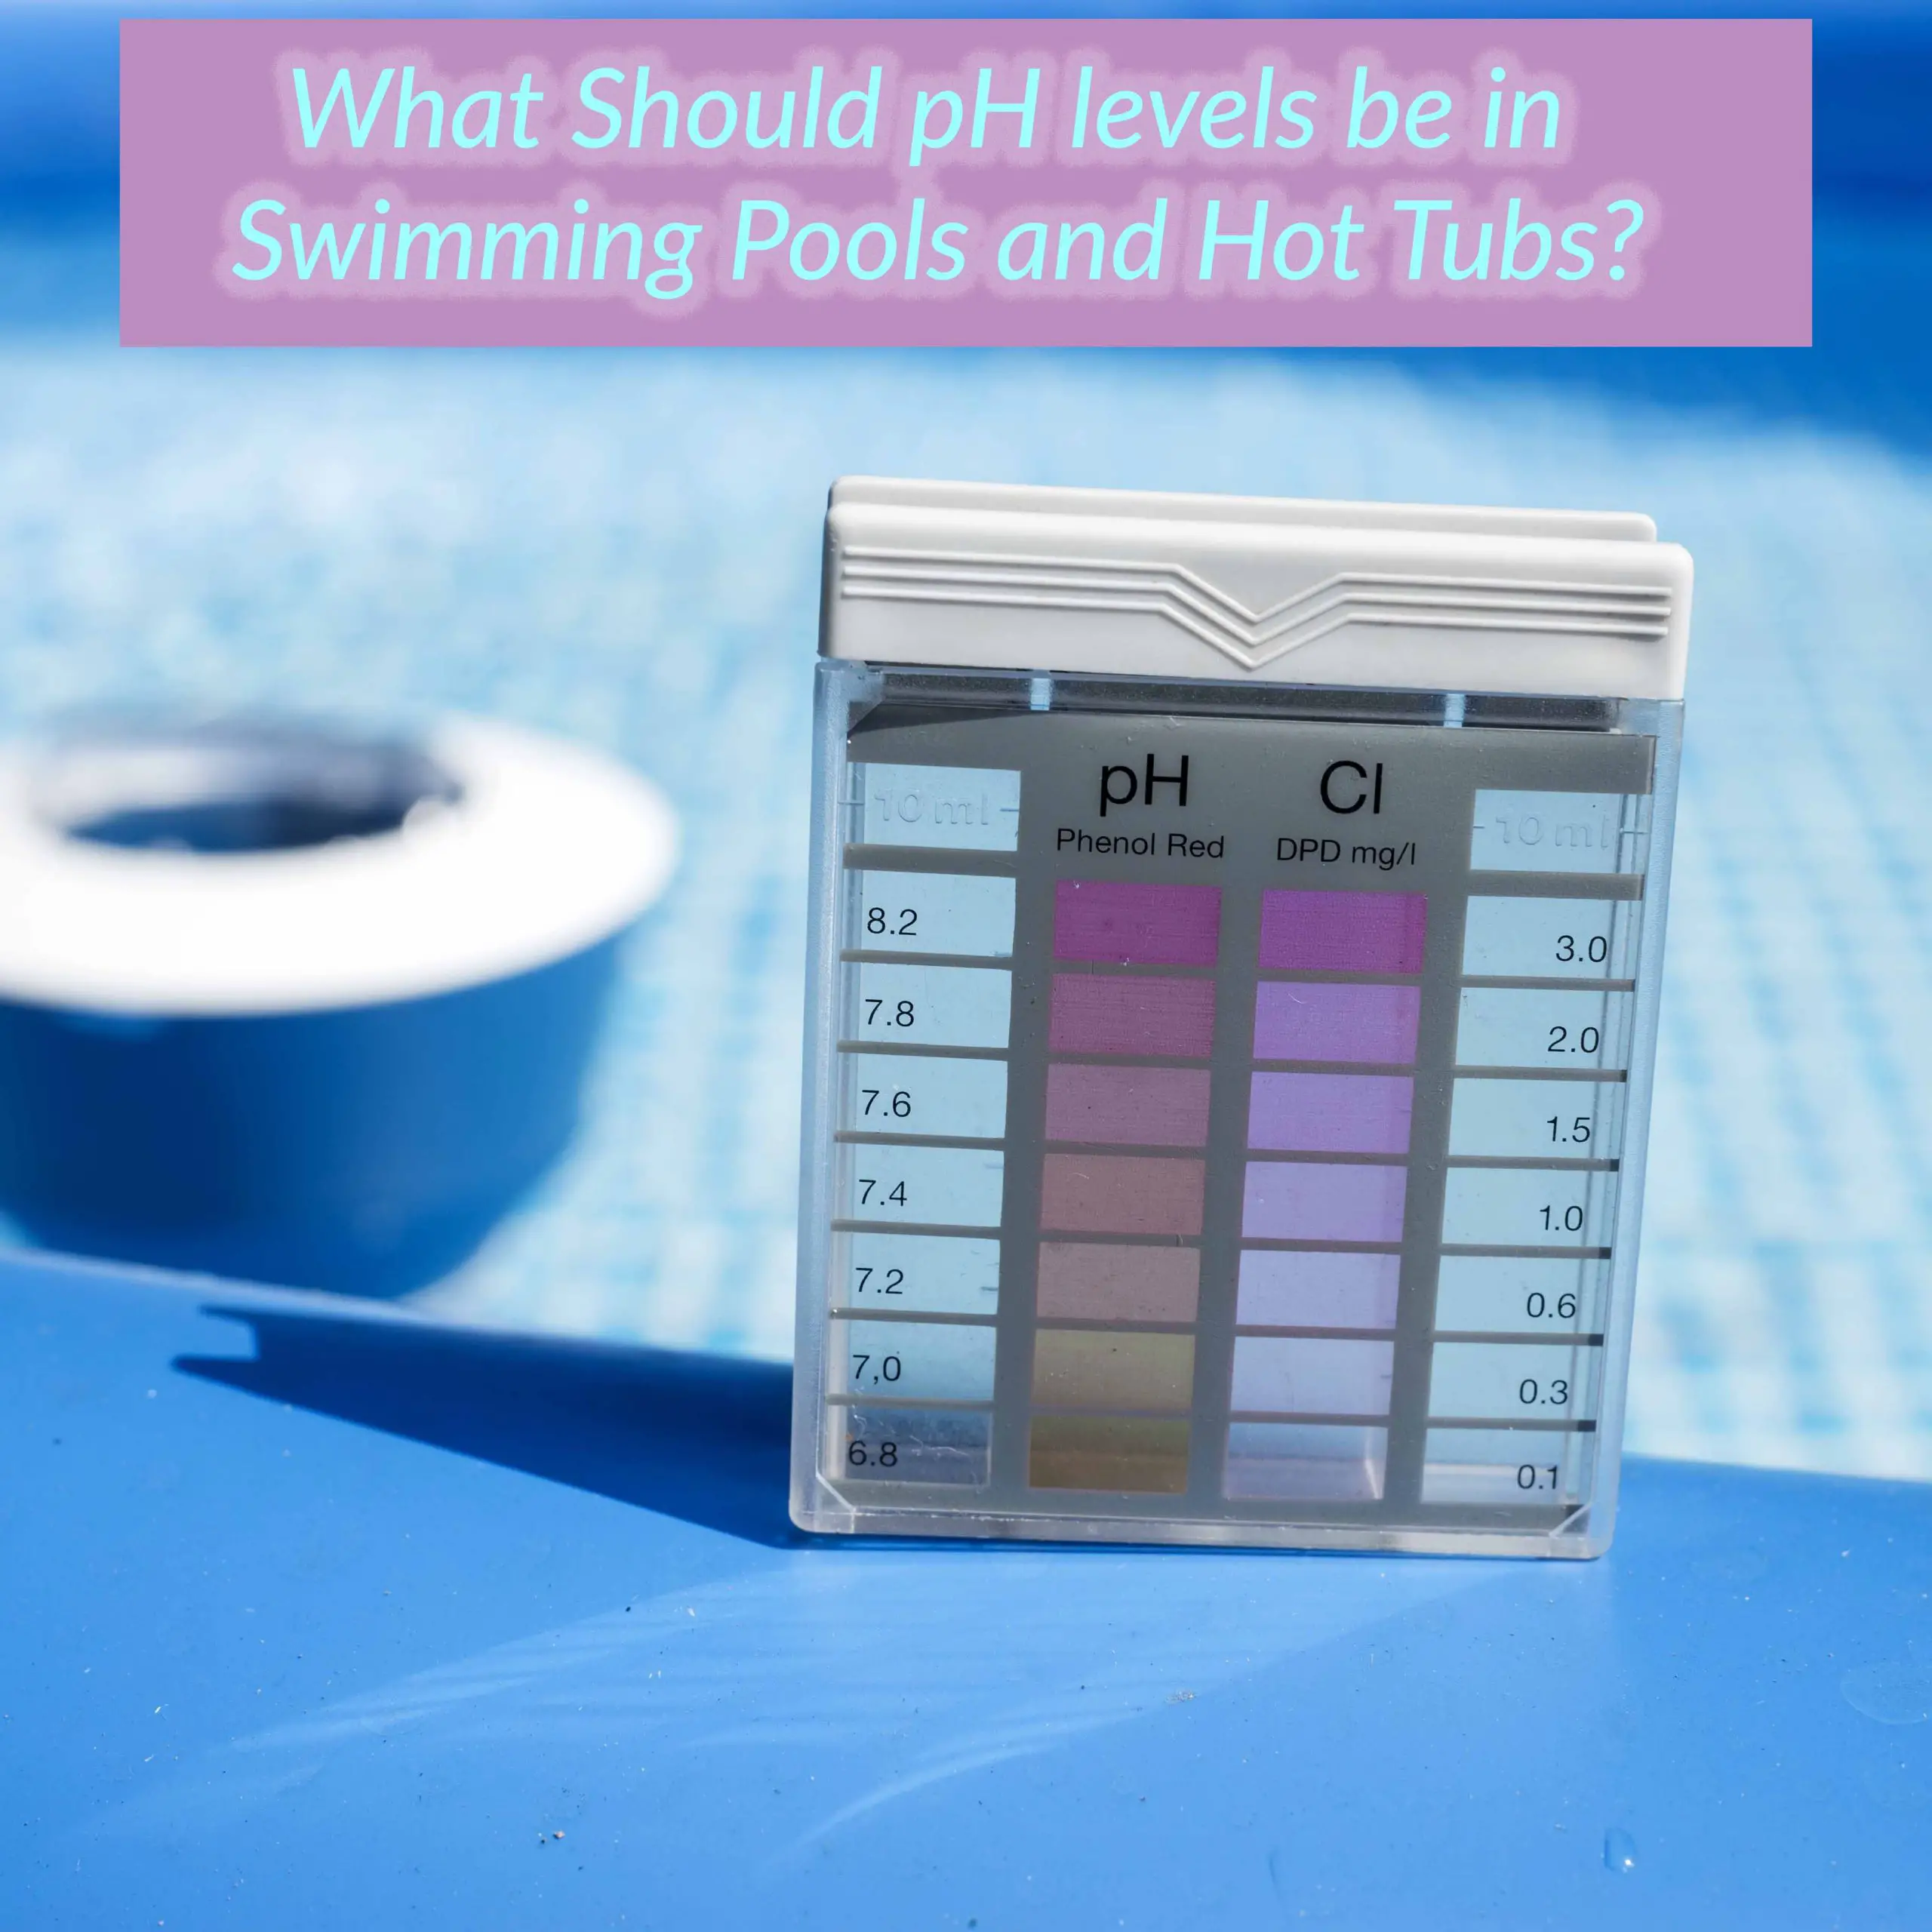 What Should pH levels be in Swimming Pools and Hot Tubs?